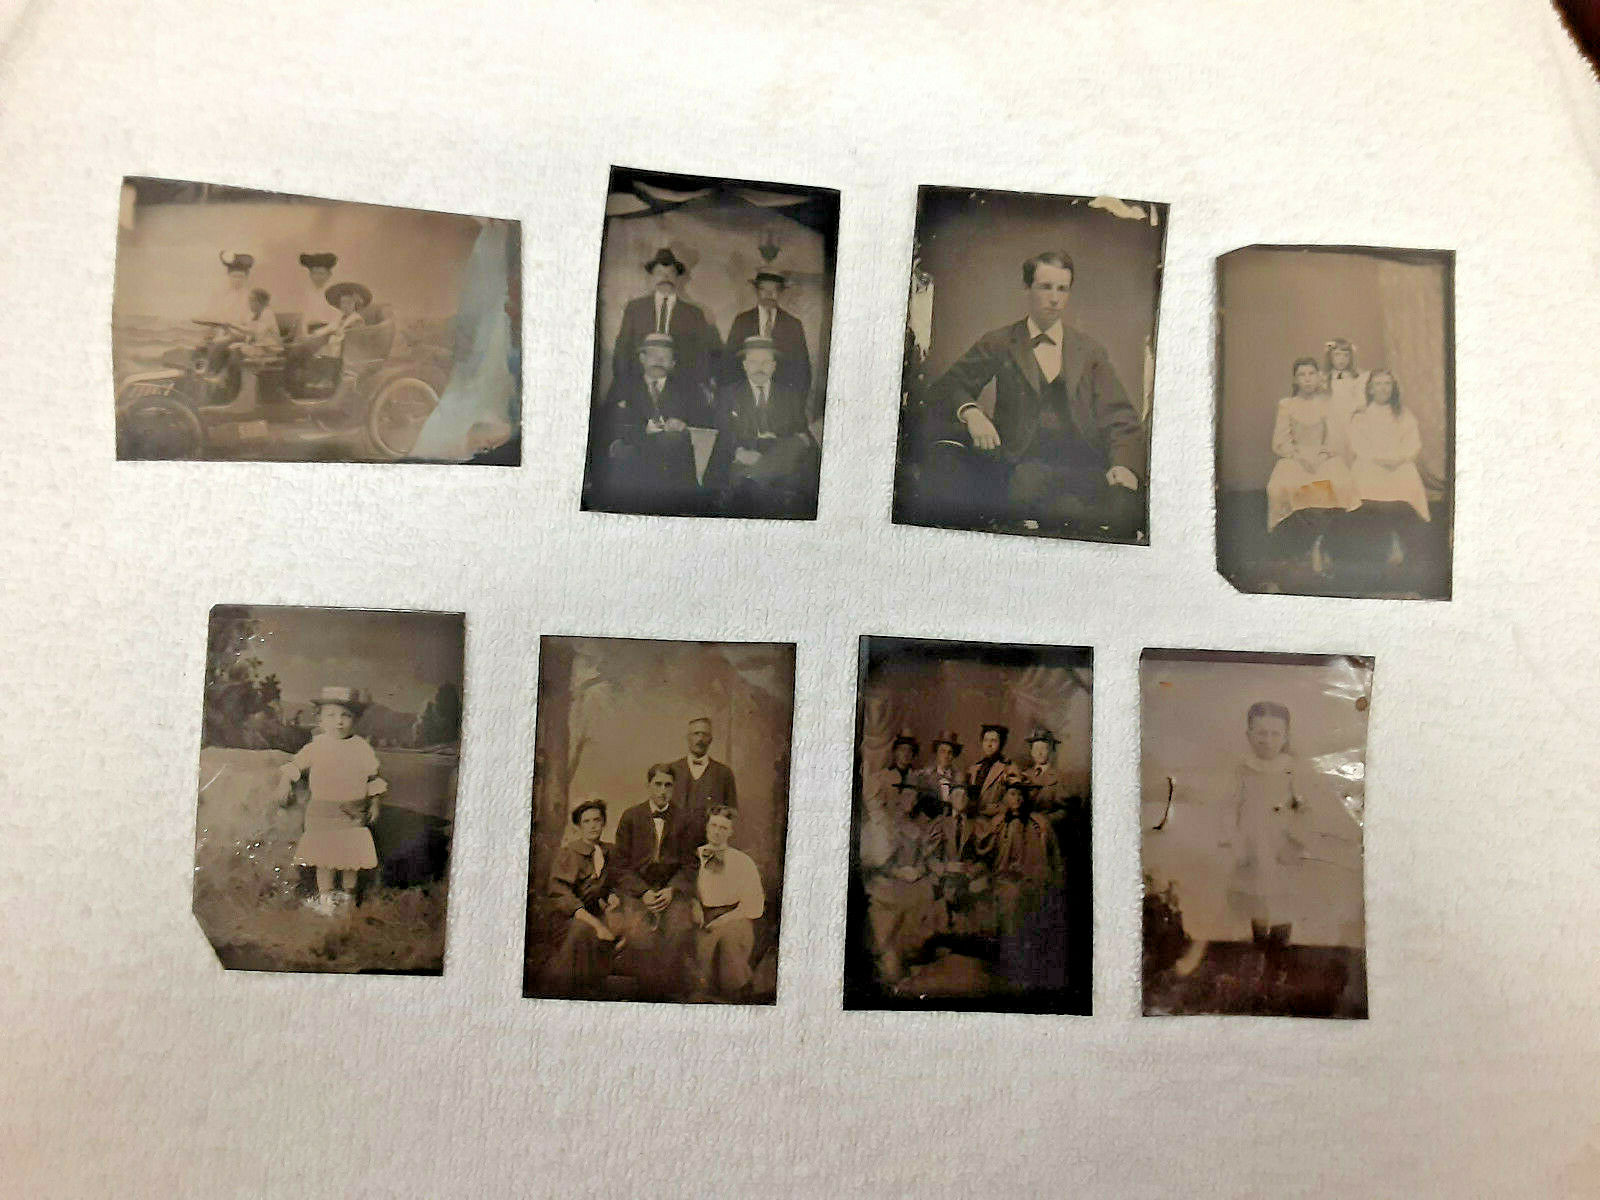 Lot of 8 Antique Tintype Photographic Images including an Early Automobile